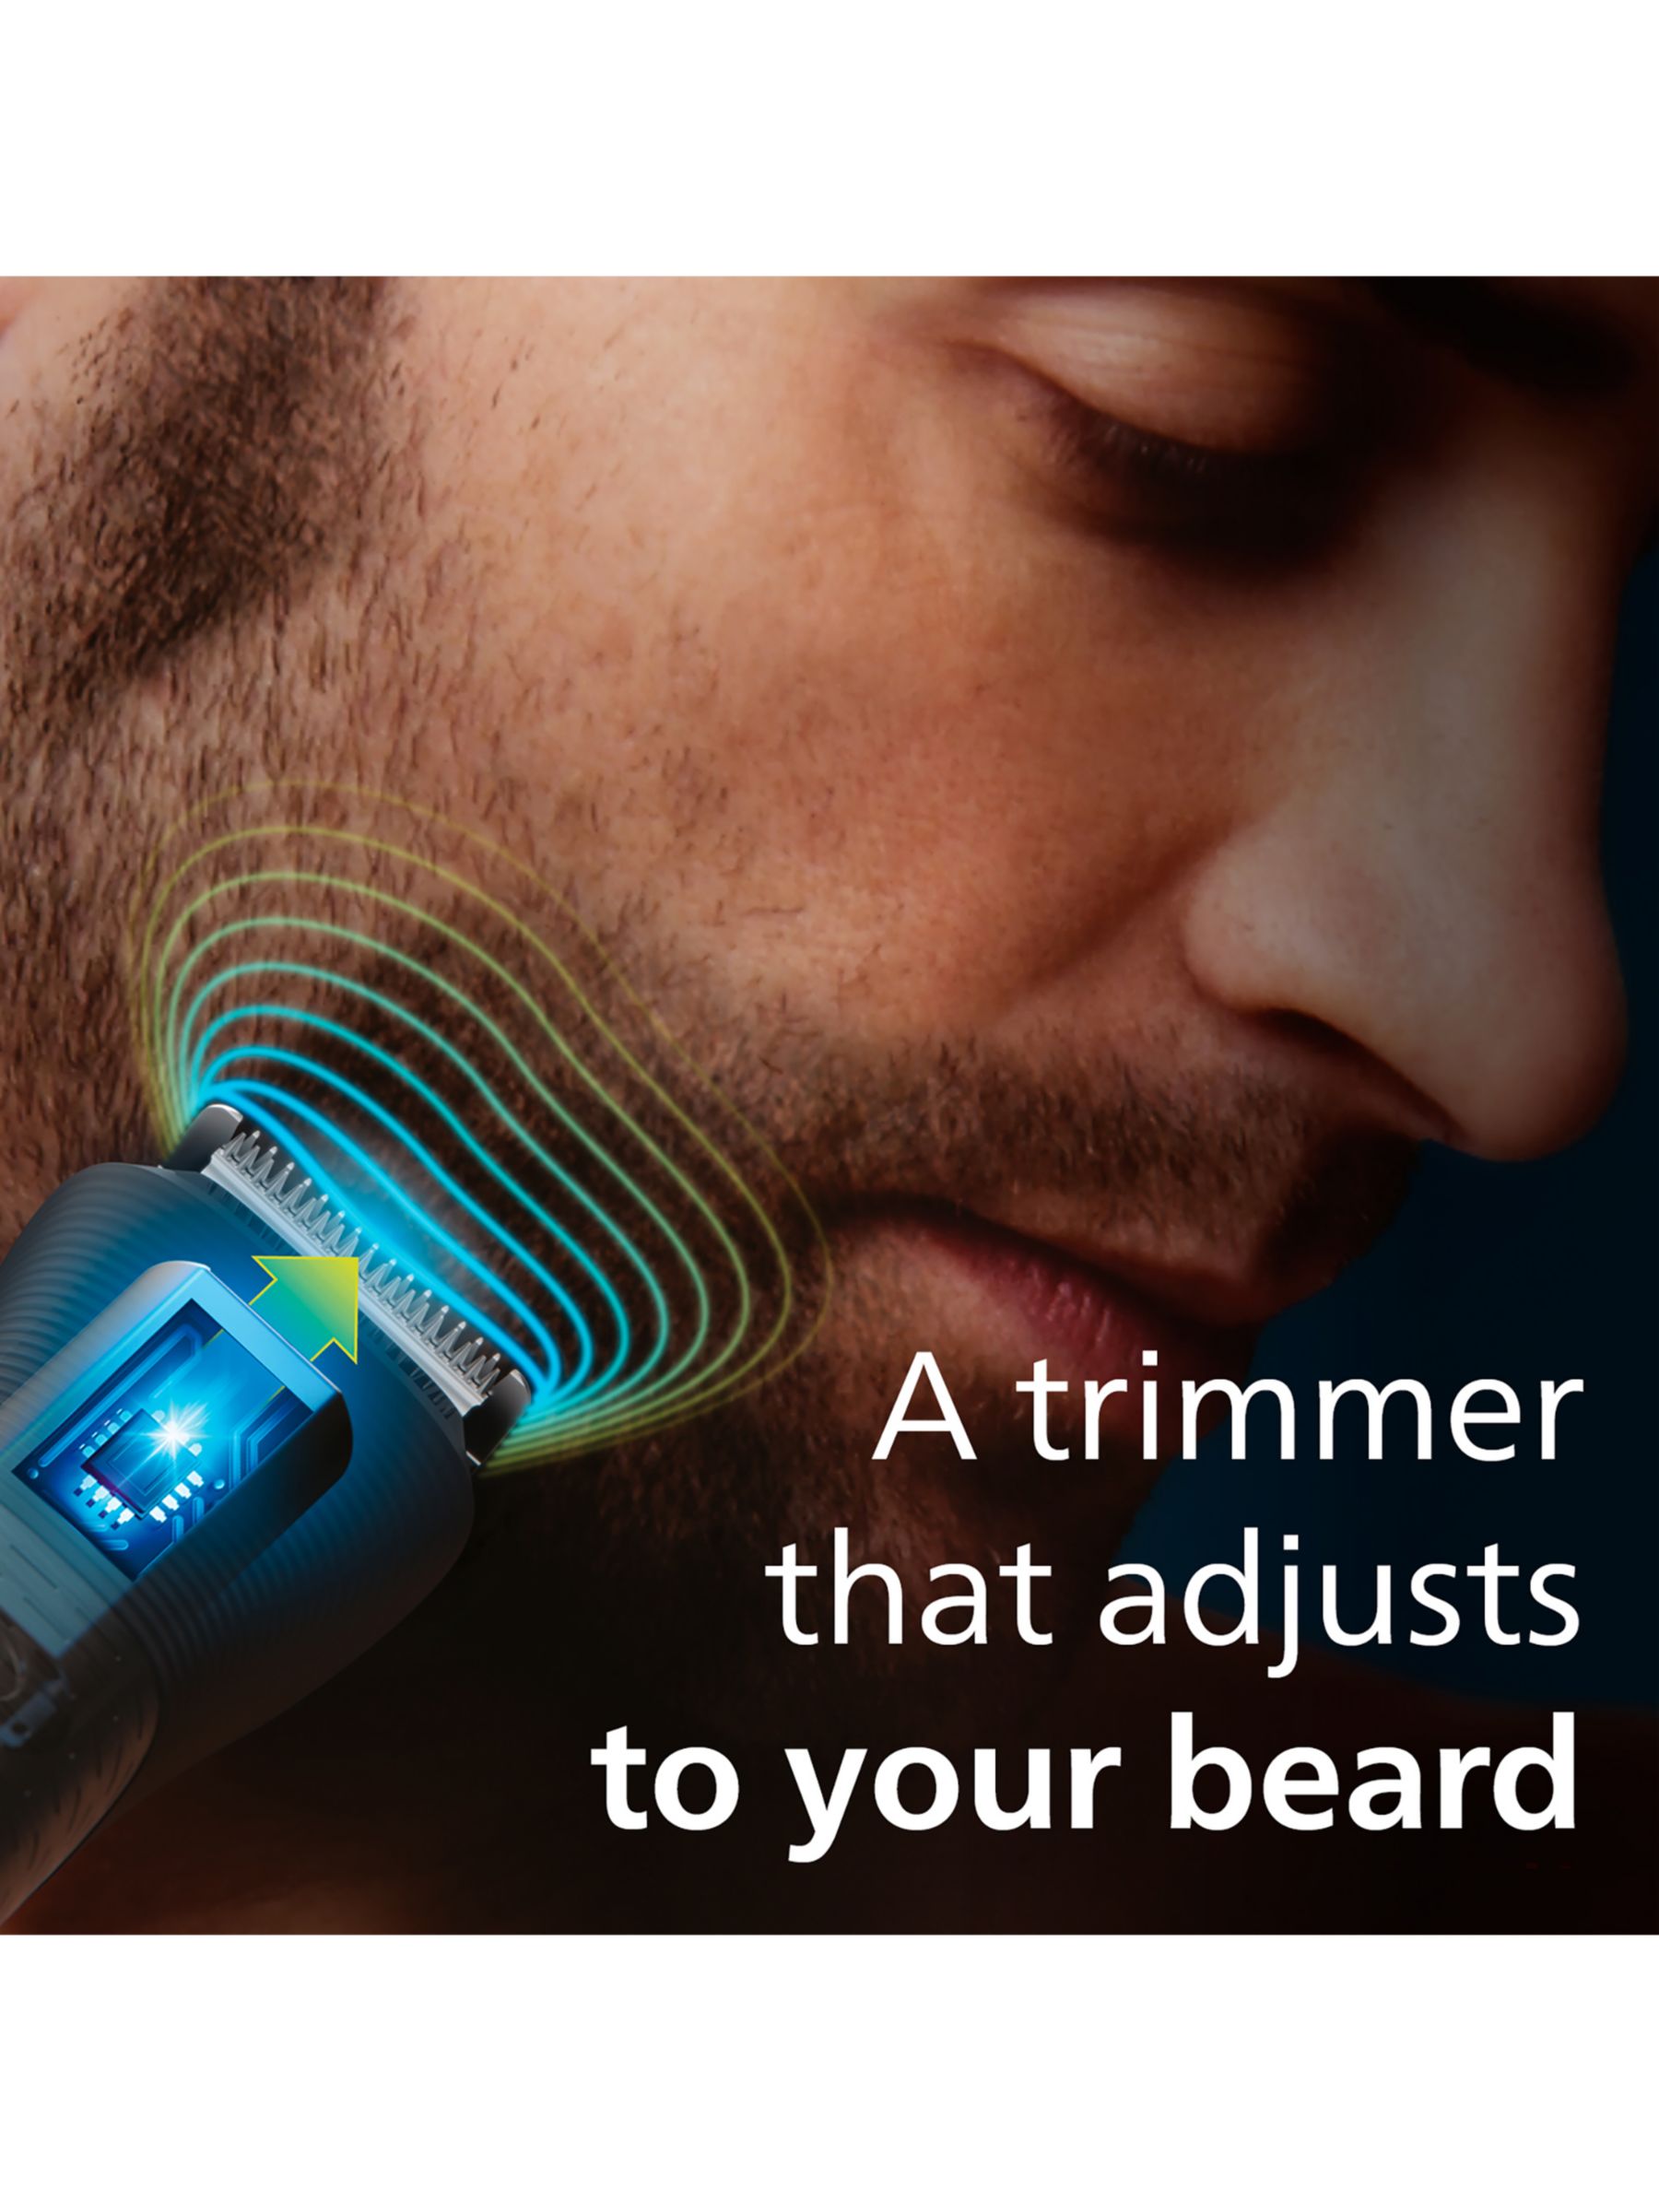 Philips Series 5000 MG5920/15,10-in-1 Multi Grooming Trimmer for Face, Head, & Body, Steel